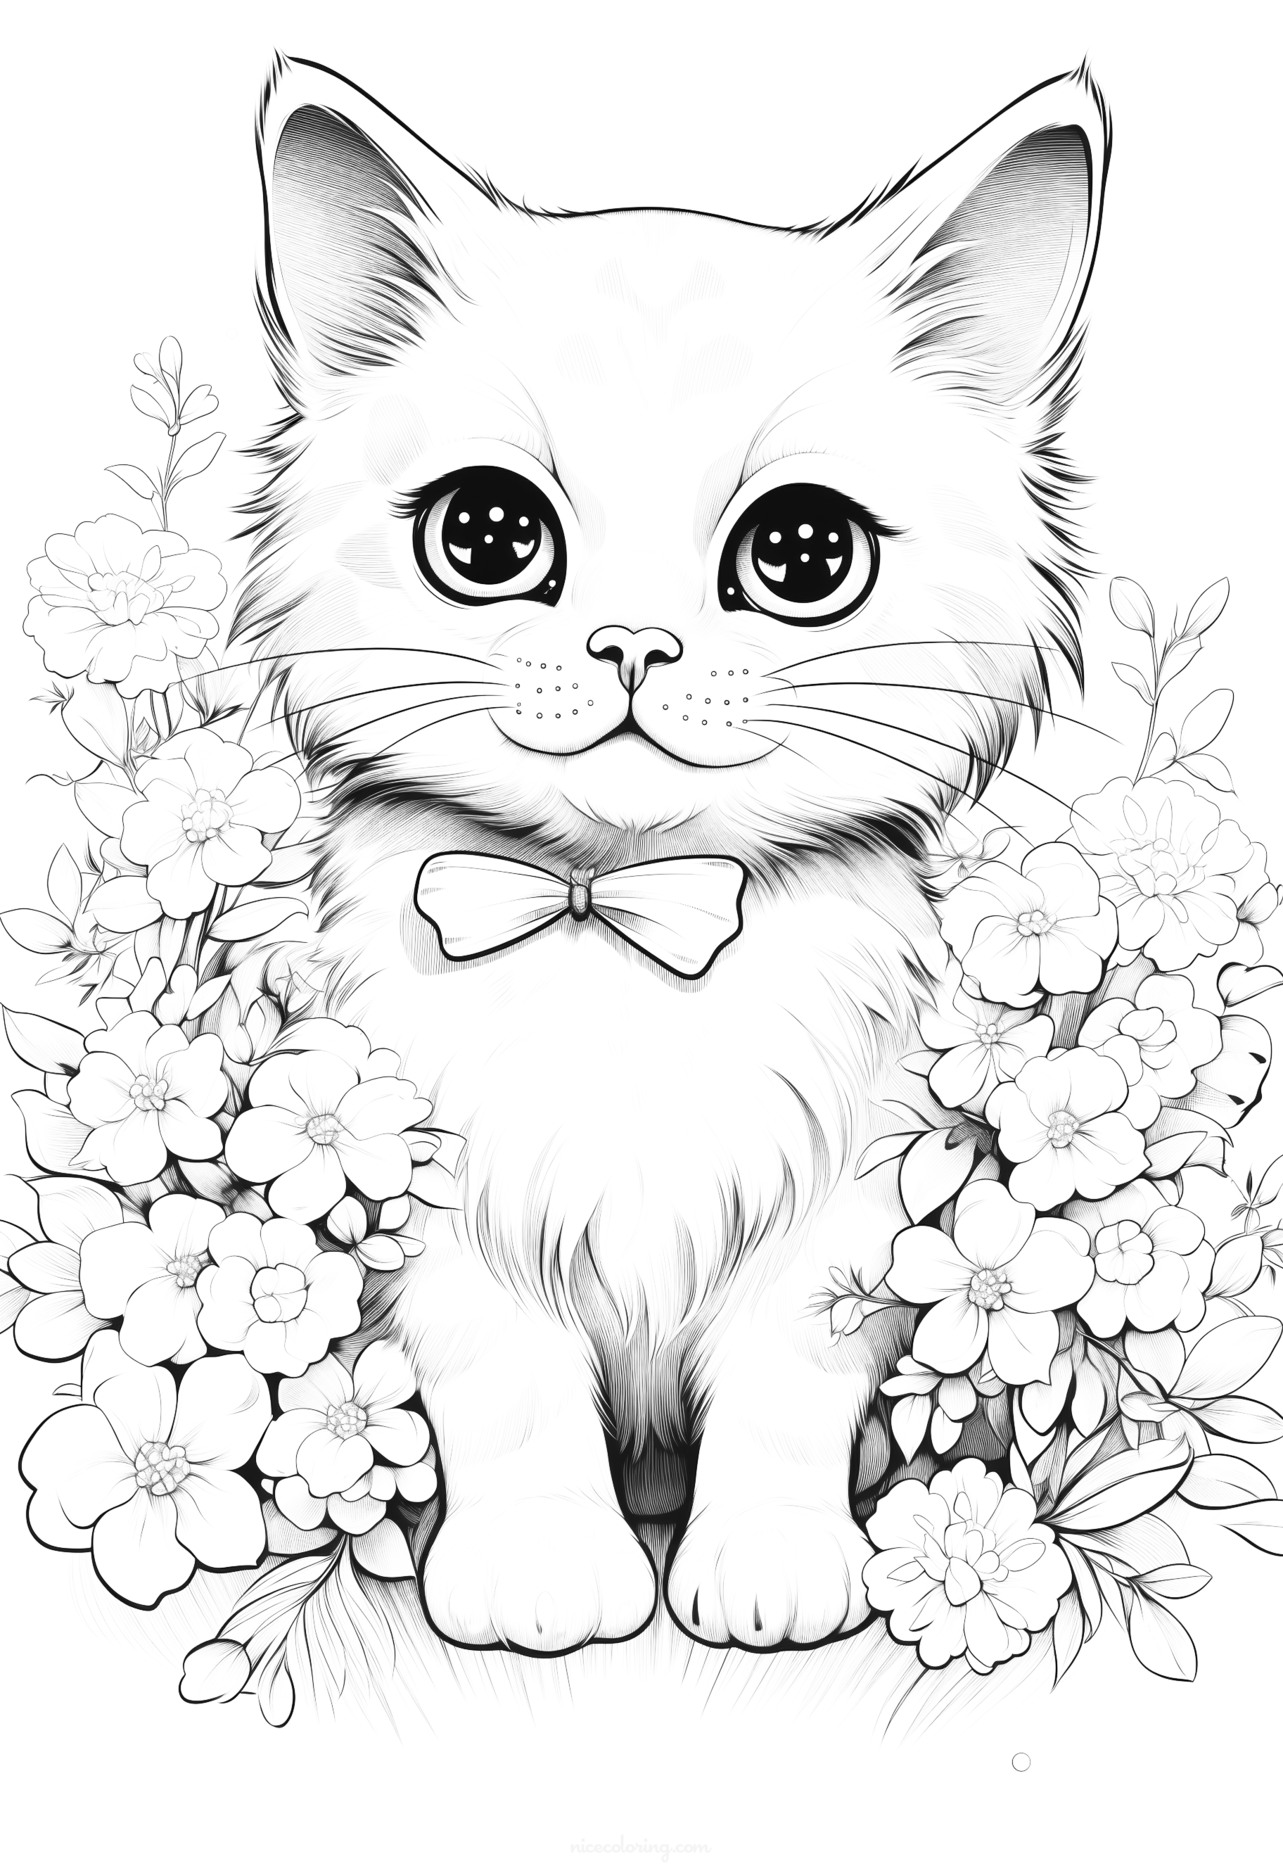 Cute cat playing with a ball of yarn coloring page